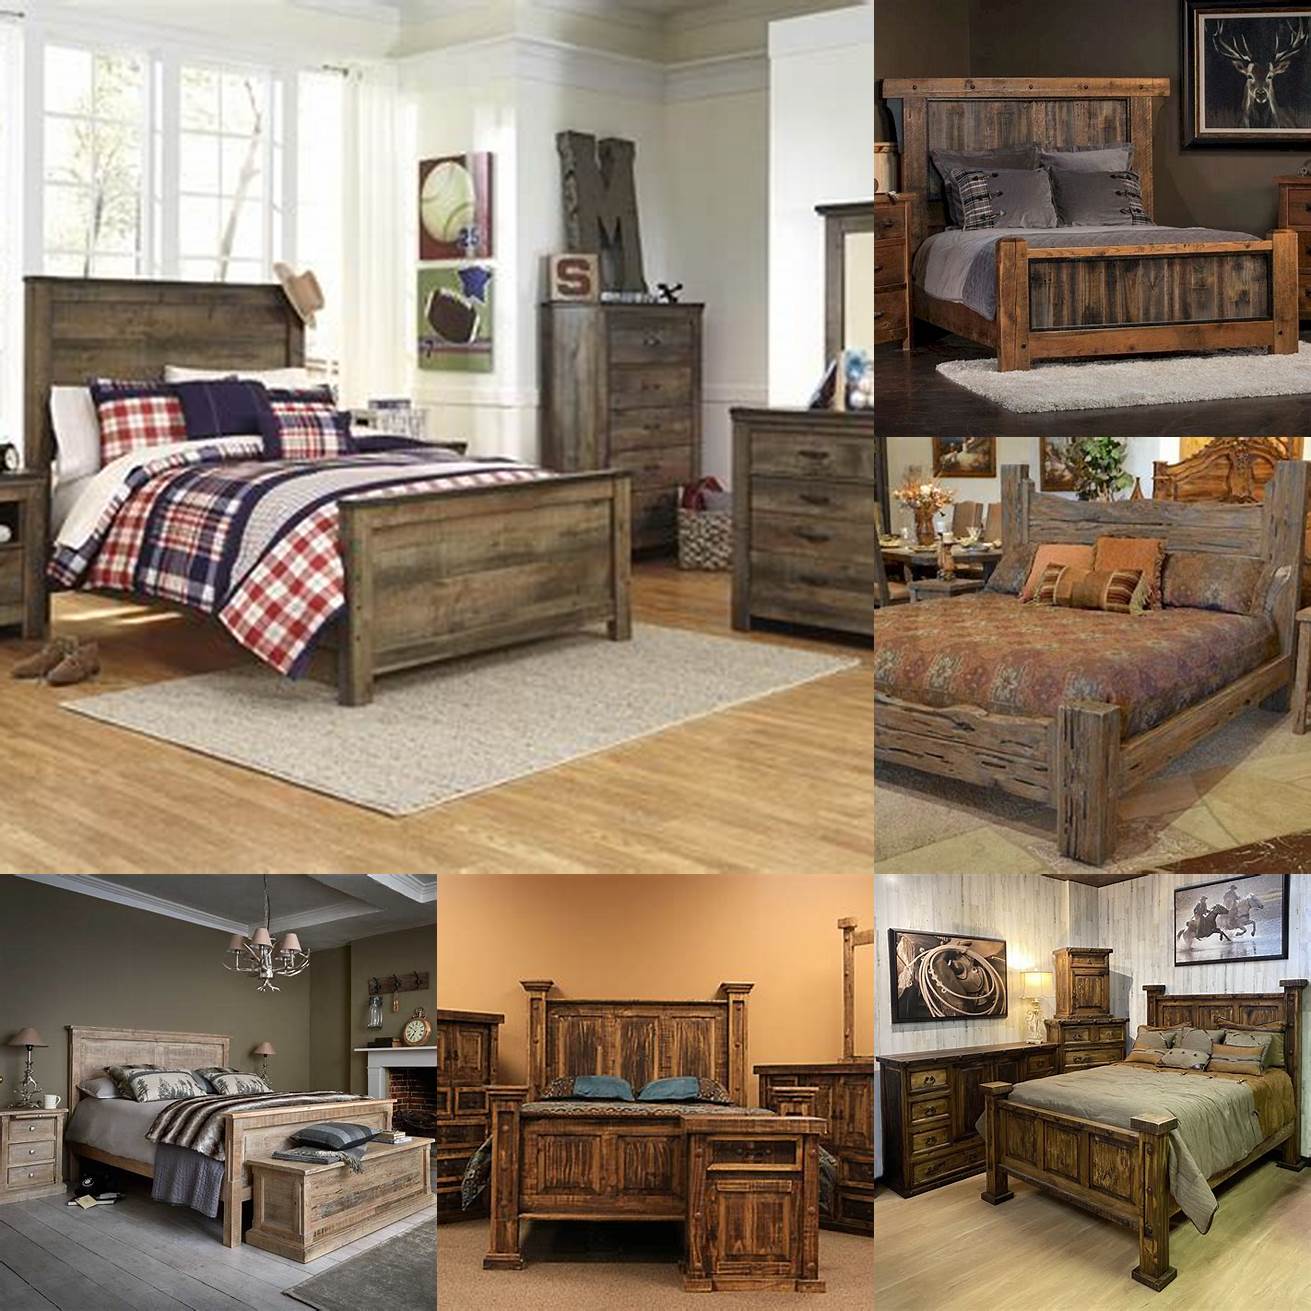 This rustic set includes a wooden bed frame nightstand and dresser perfect for a nature-loving boy